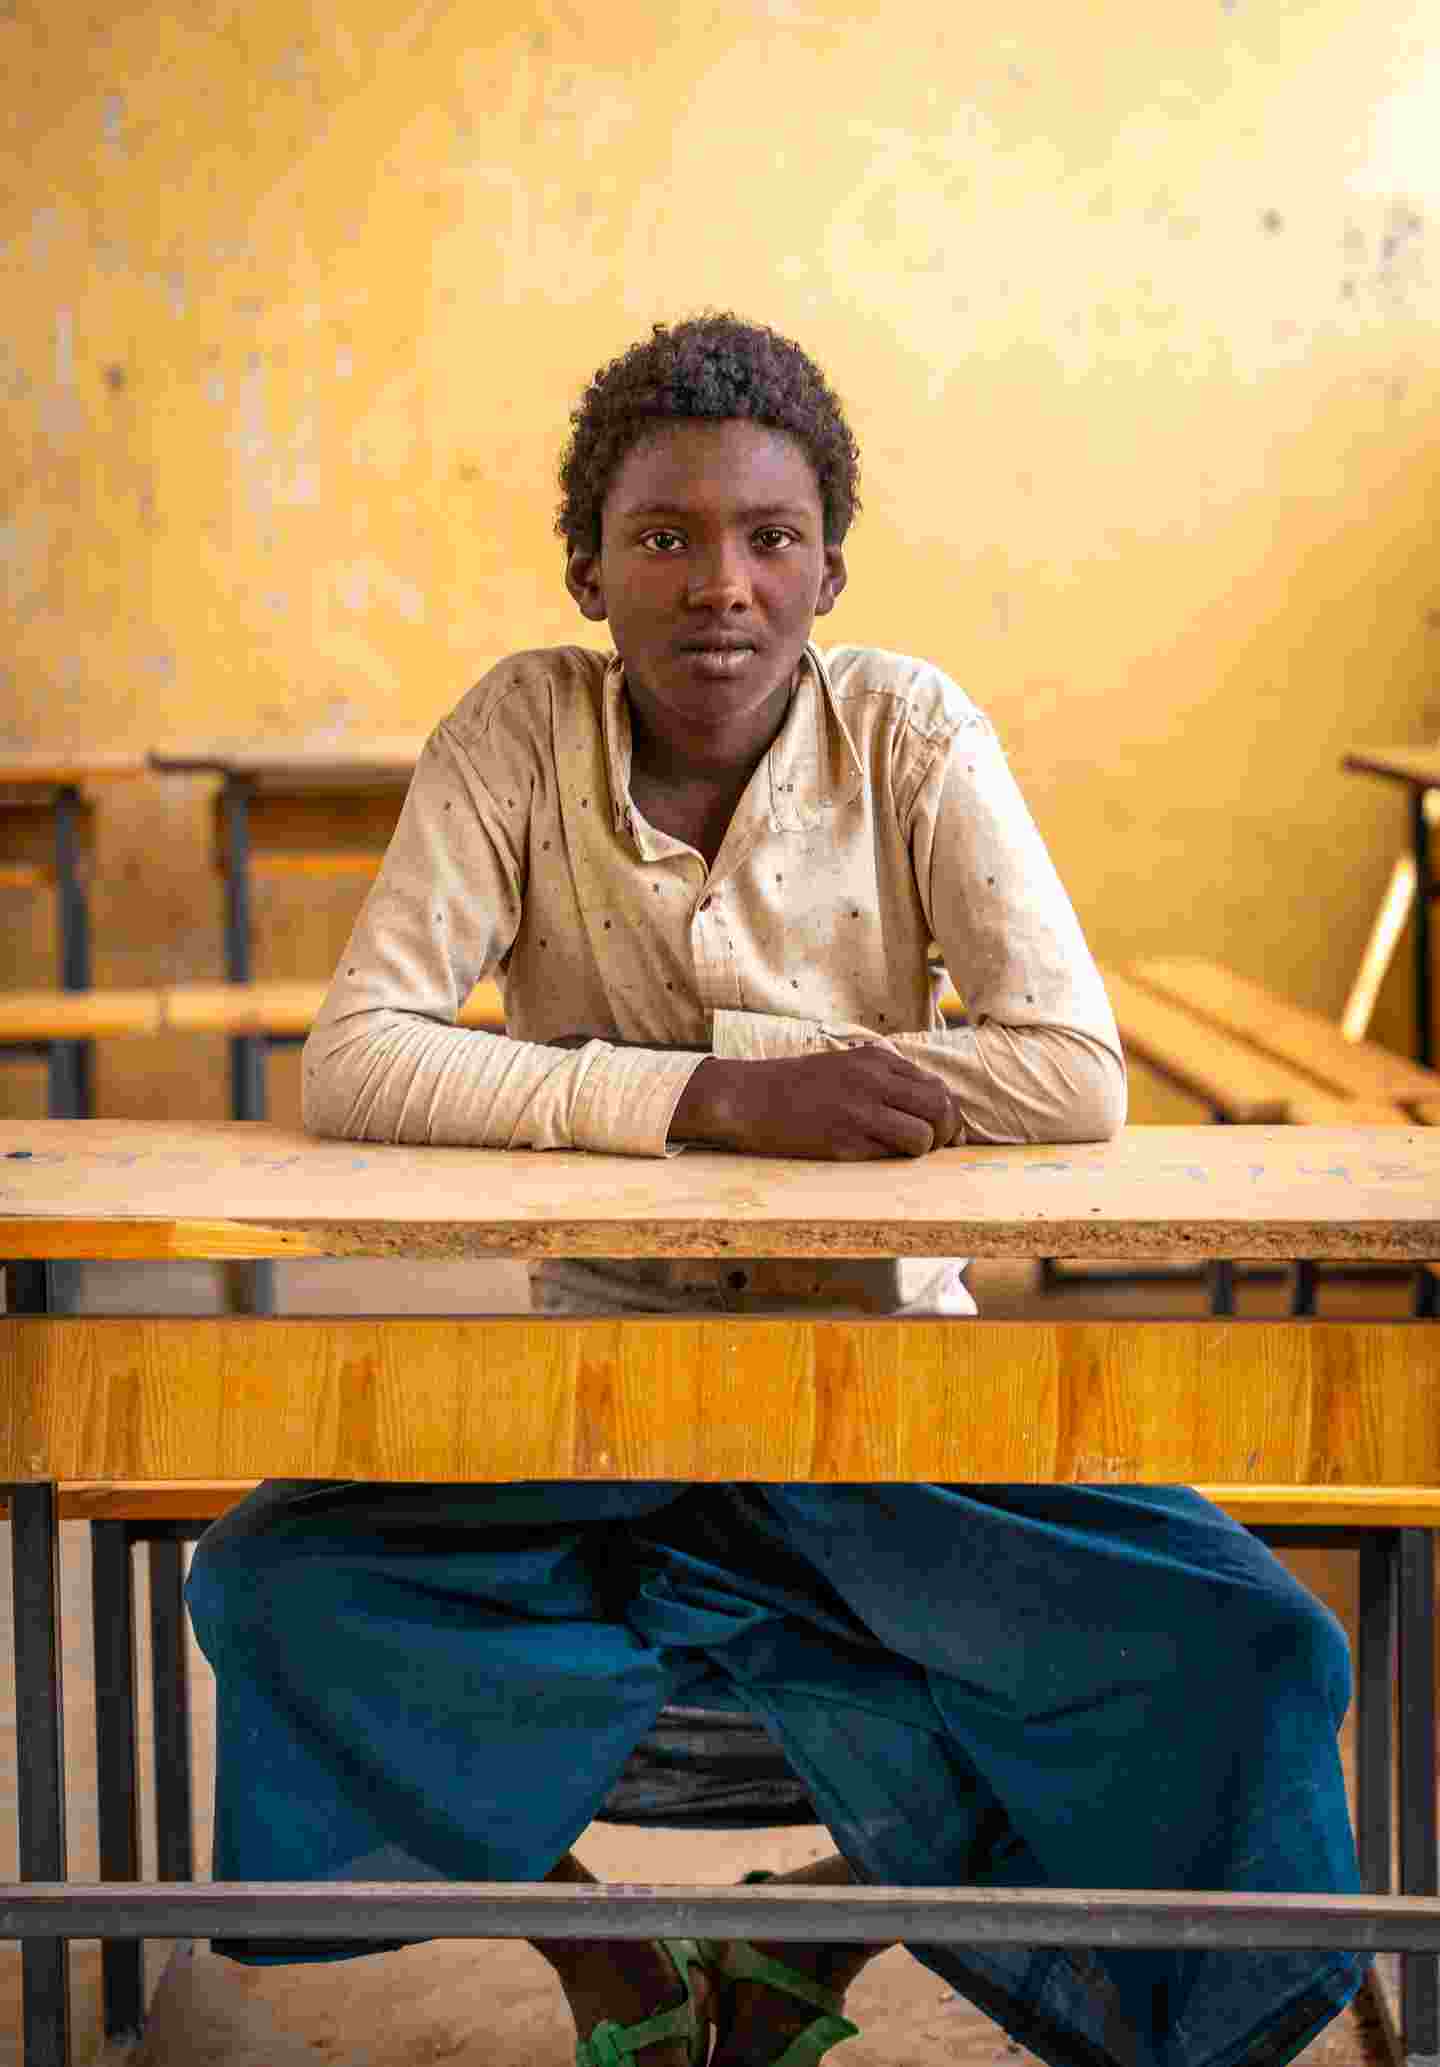 A young person sitting in a class room.